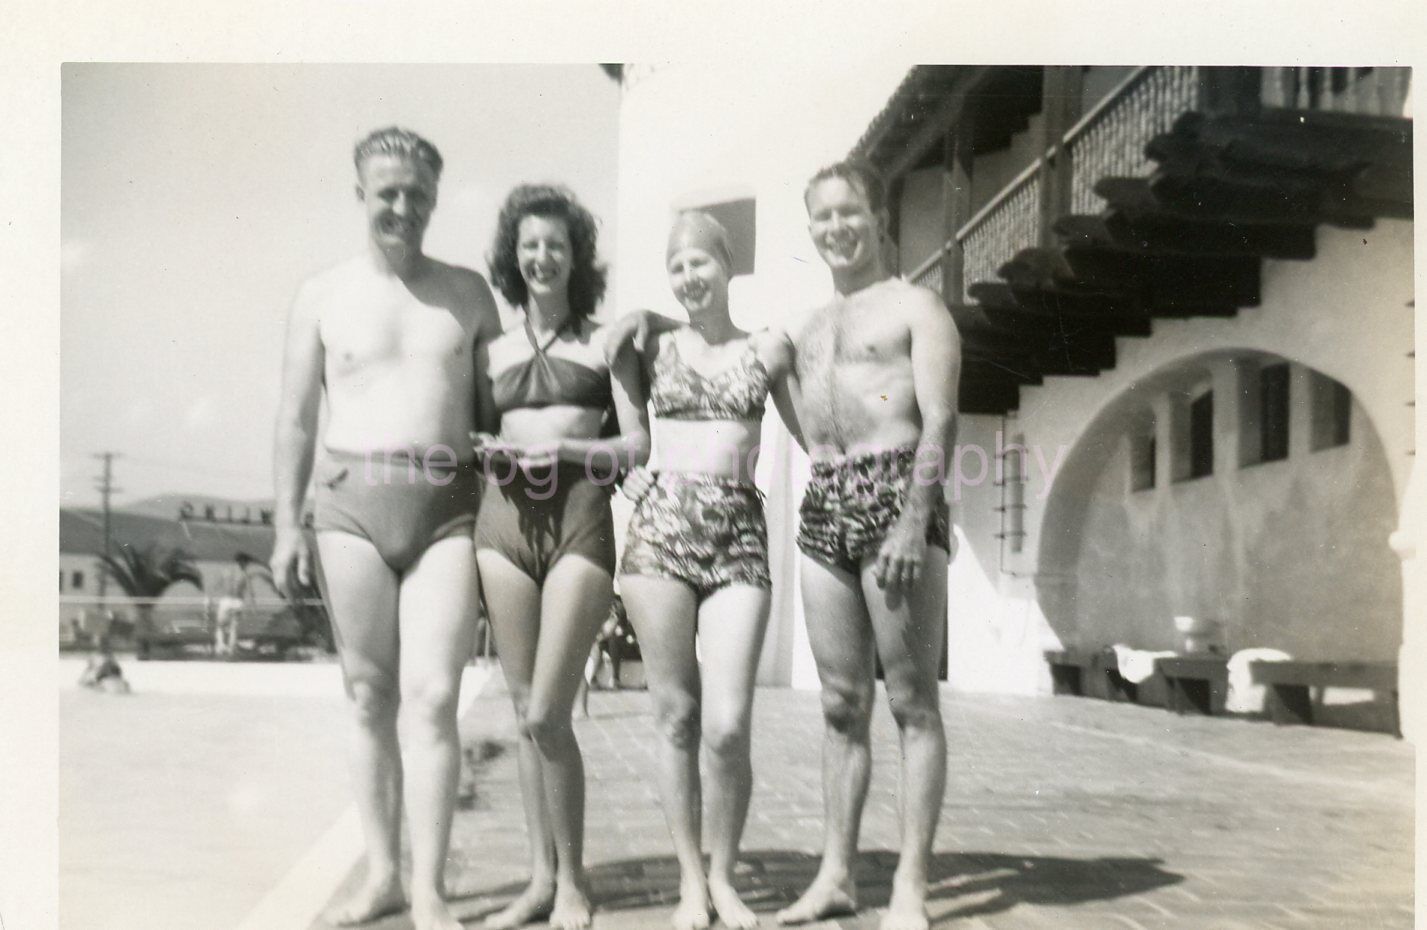 A DAY AT THE BEACH Vintage FOUND PHOTO Black And White Snapshot 312 LA 87 C2